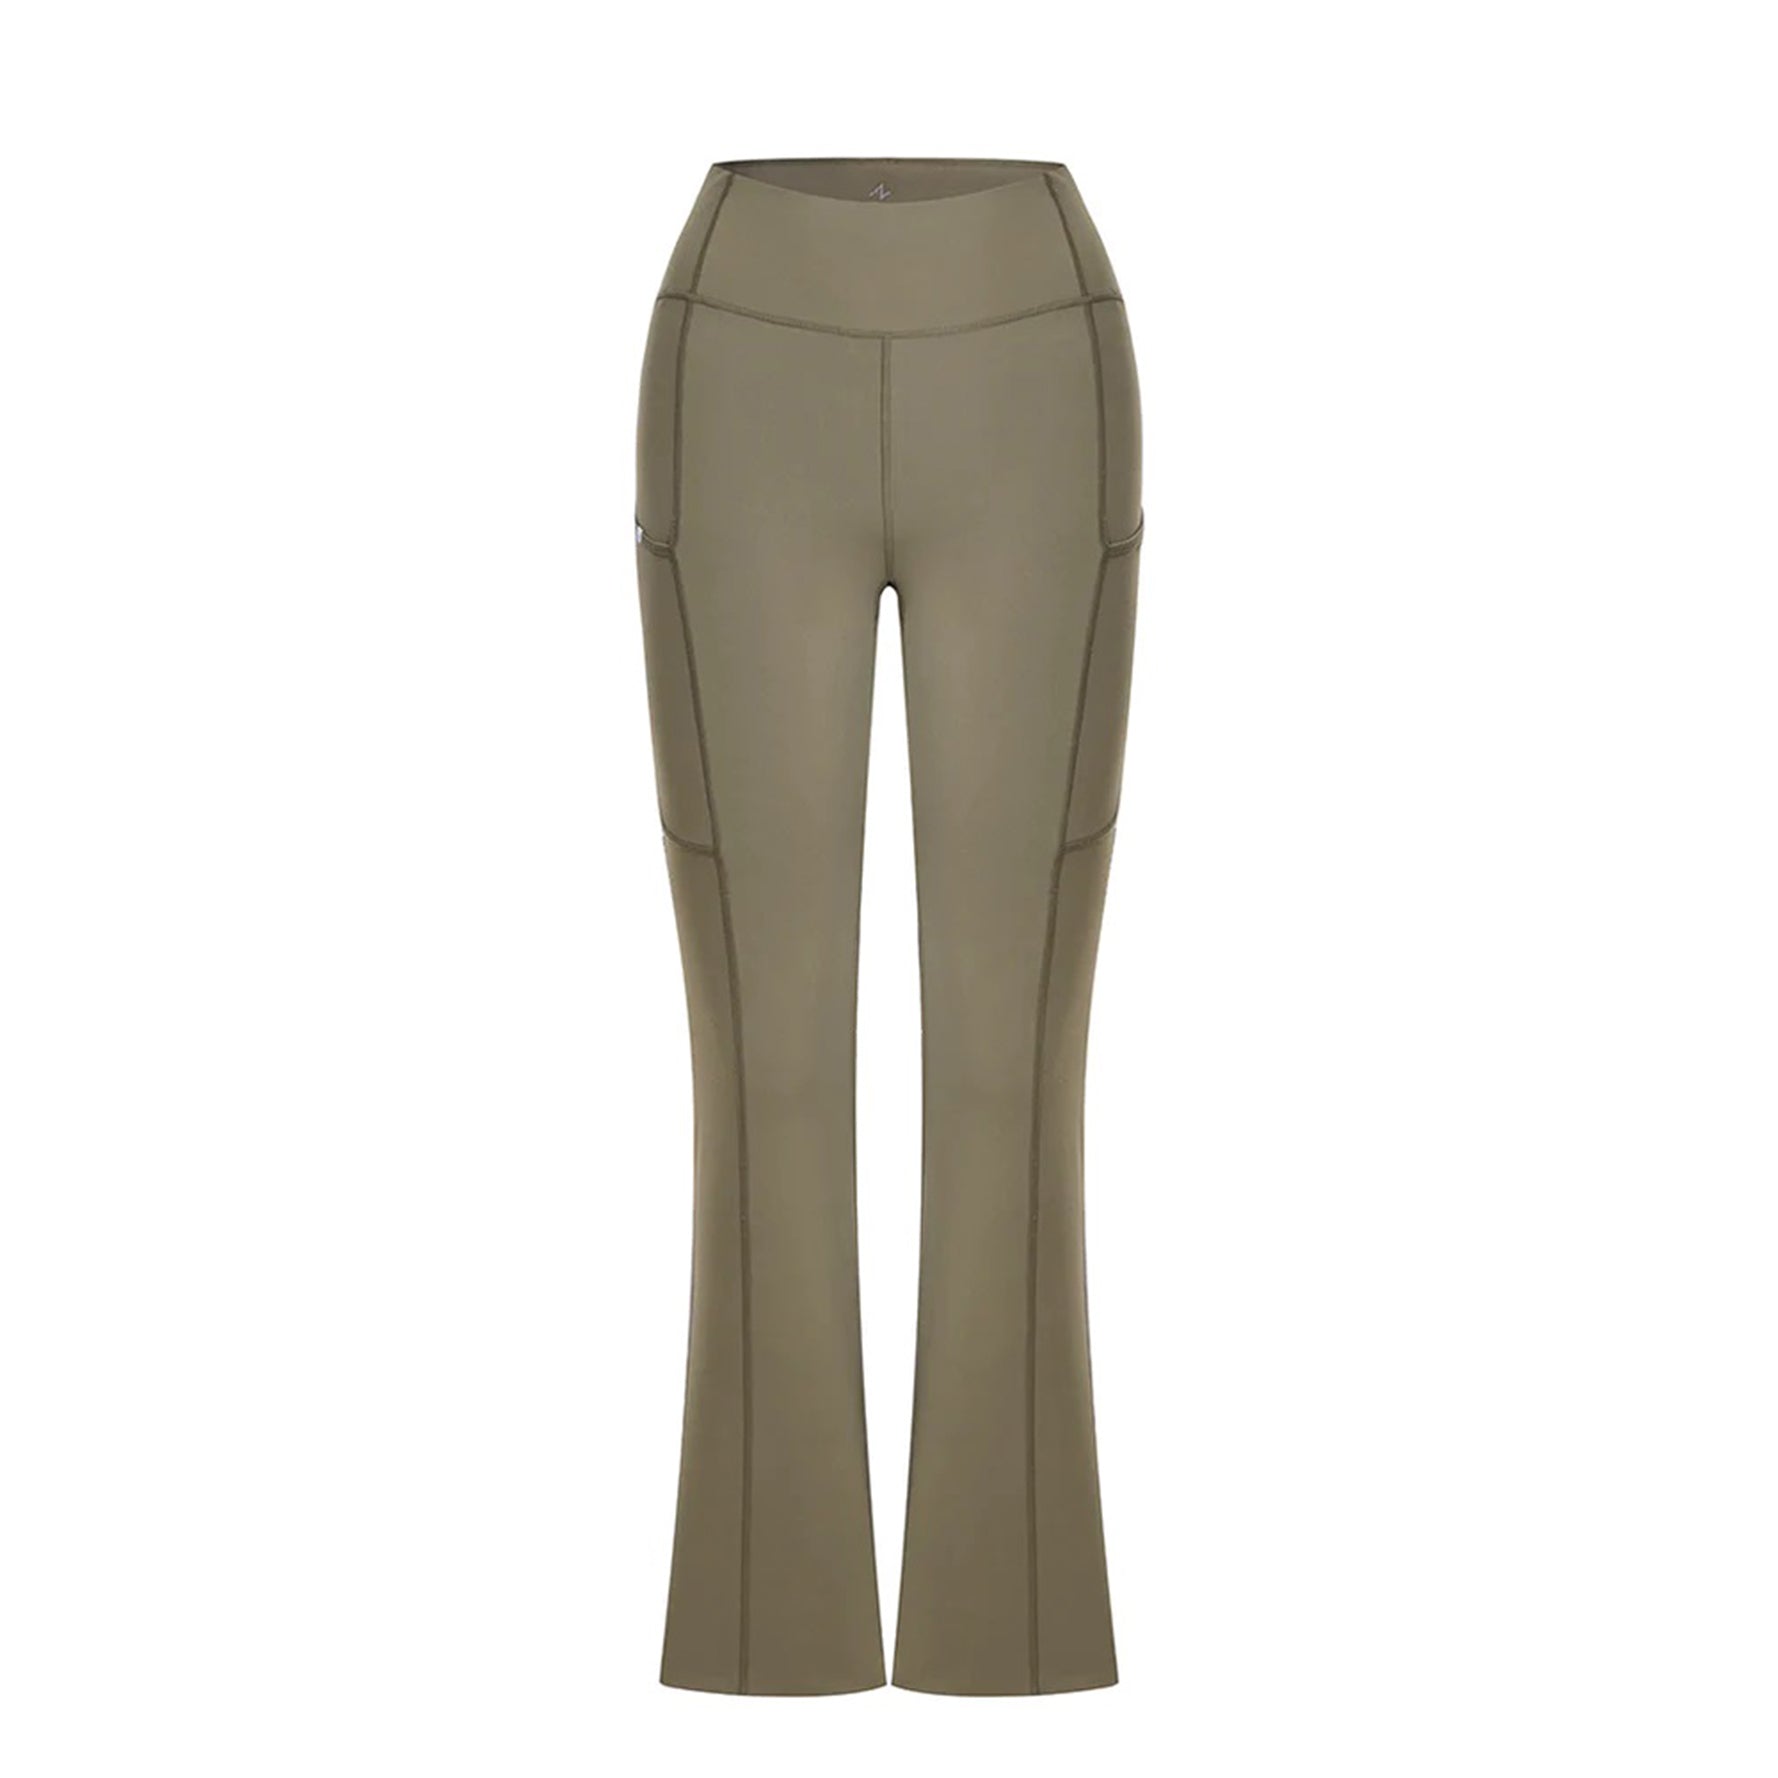 34 in. Athletica Fit Solid Flare Pants | Bealls Florida